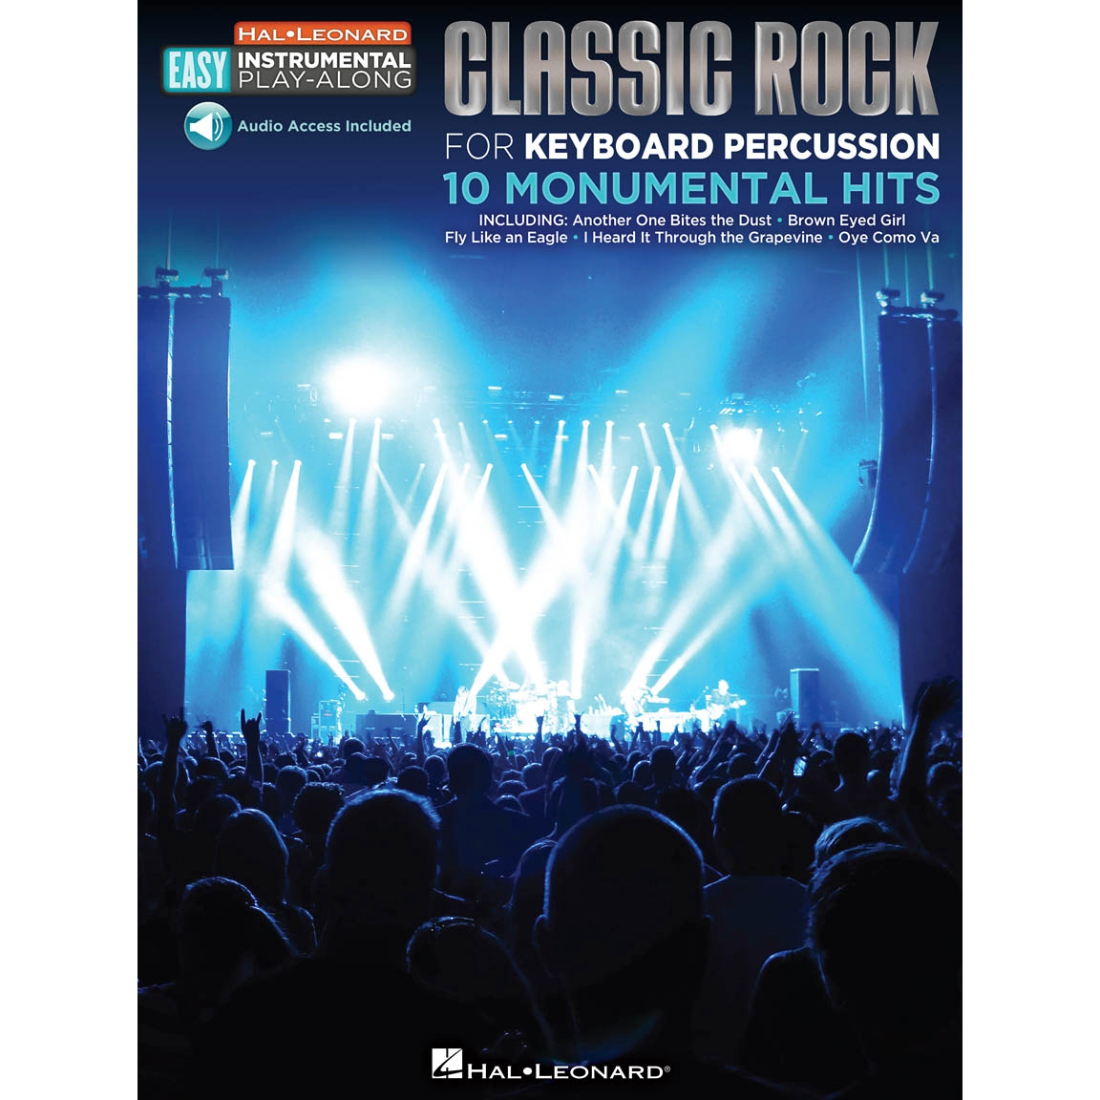 Blue concert scene on the cover, titled Classic Rock